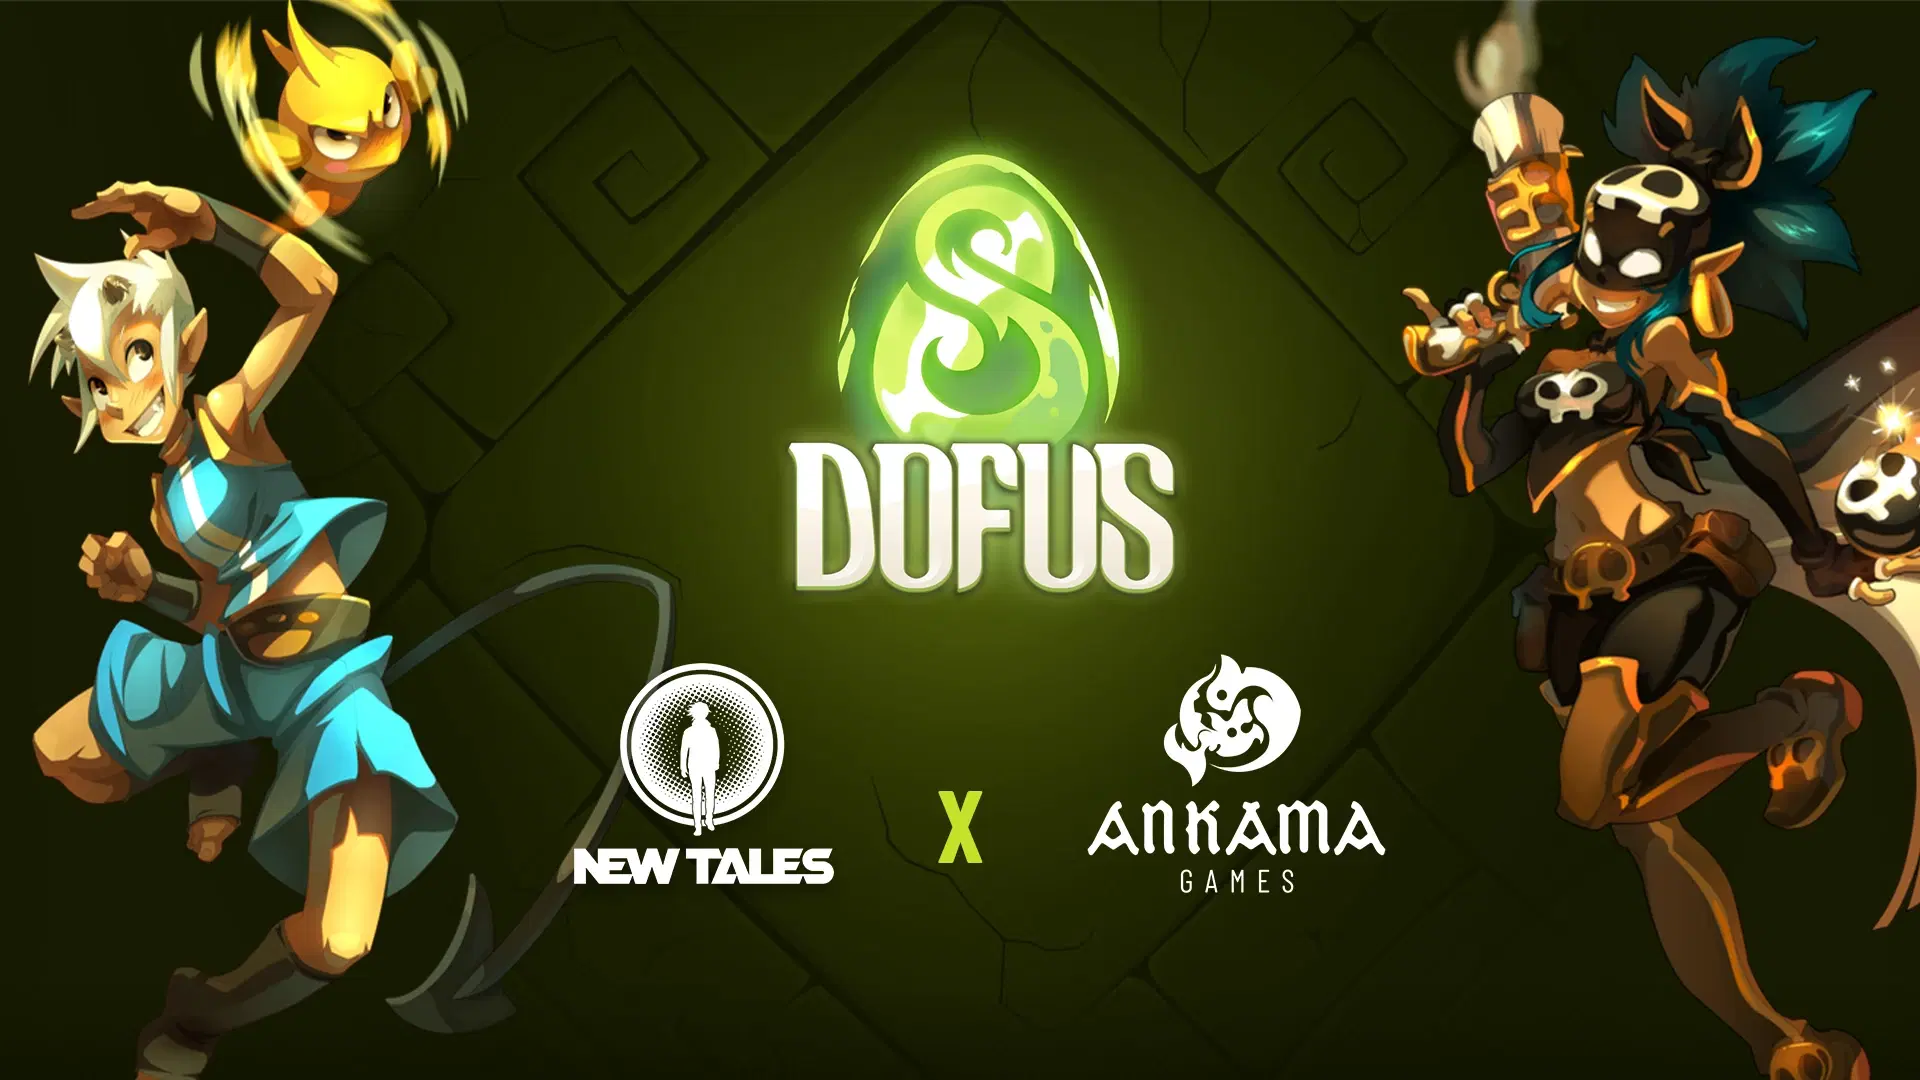 Ankama and New Tales are teaming up once more for the most anticipated update of their iconic game: DOFUS Unity